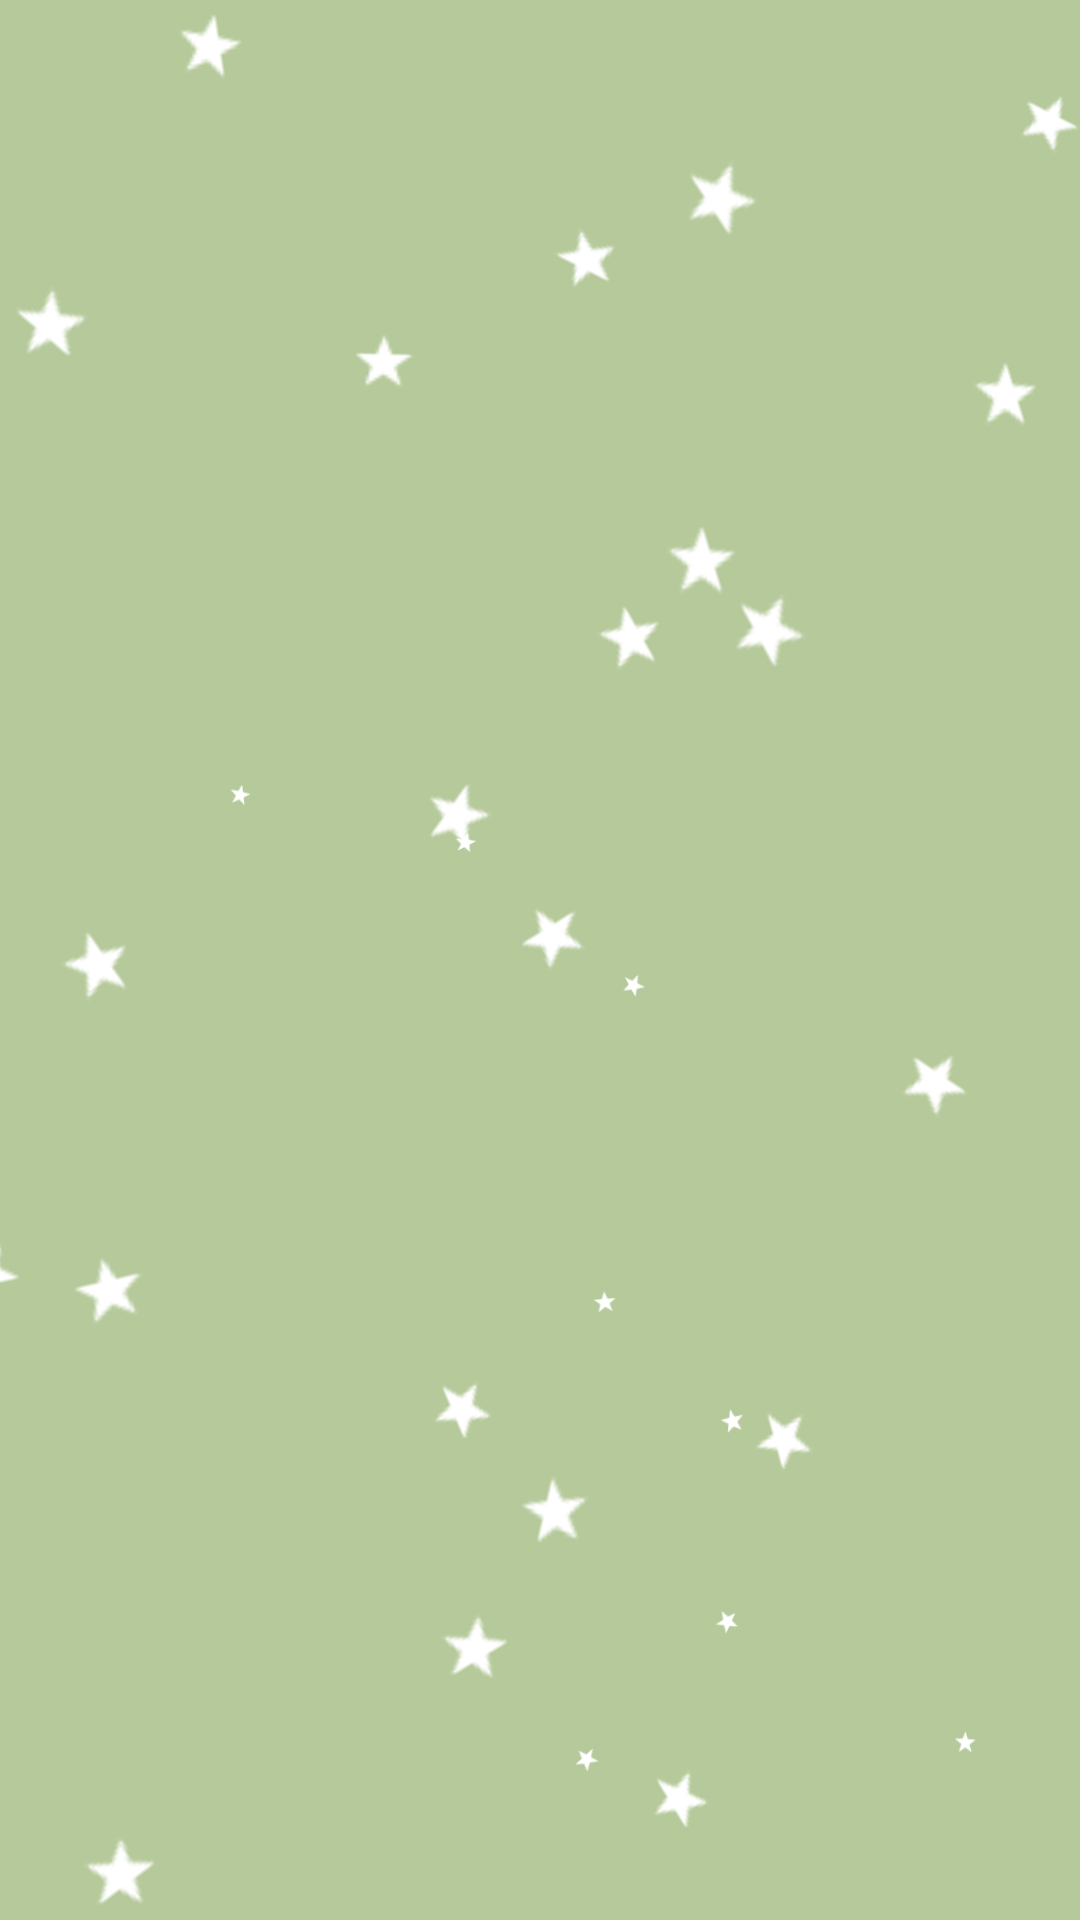 A green wallpaper with white stars - Green, lime green, sage green, stars